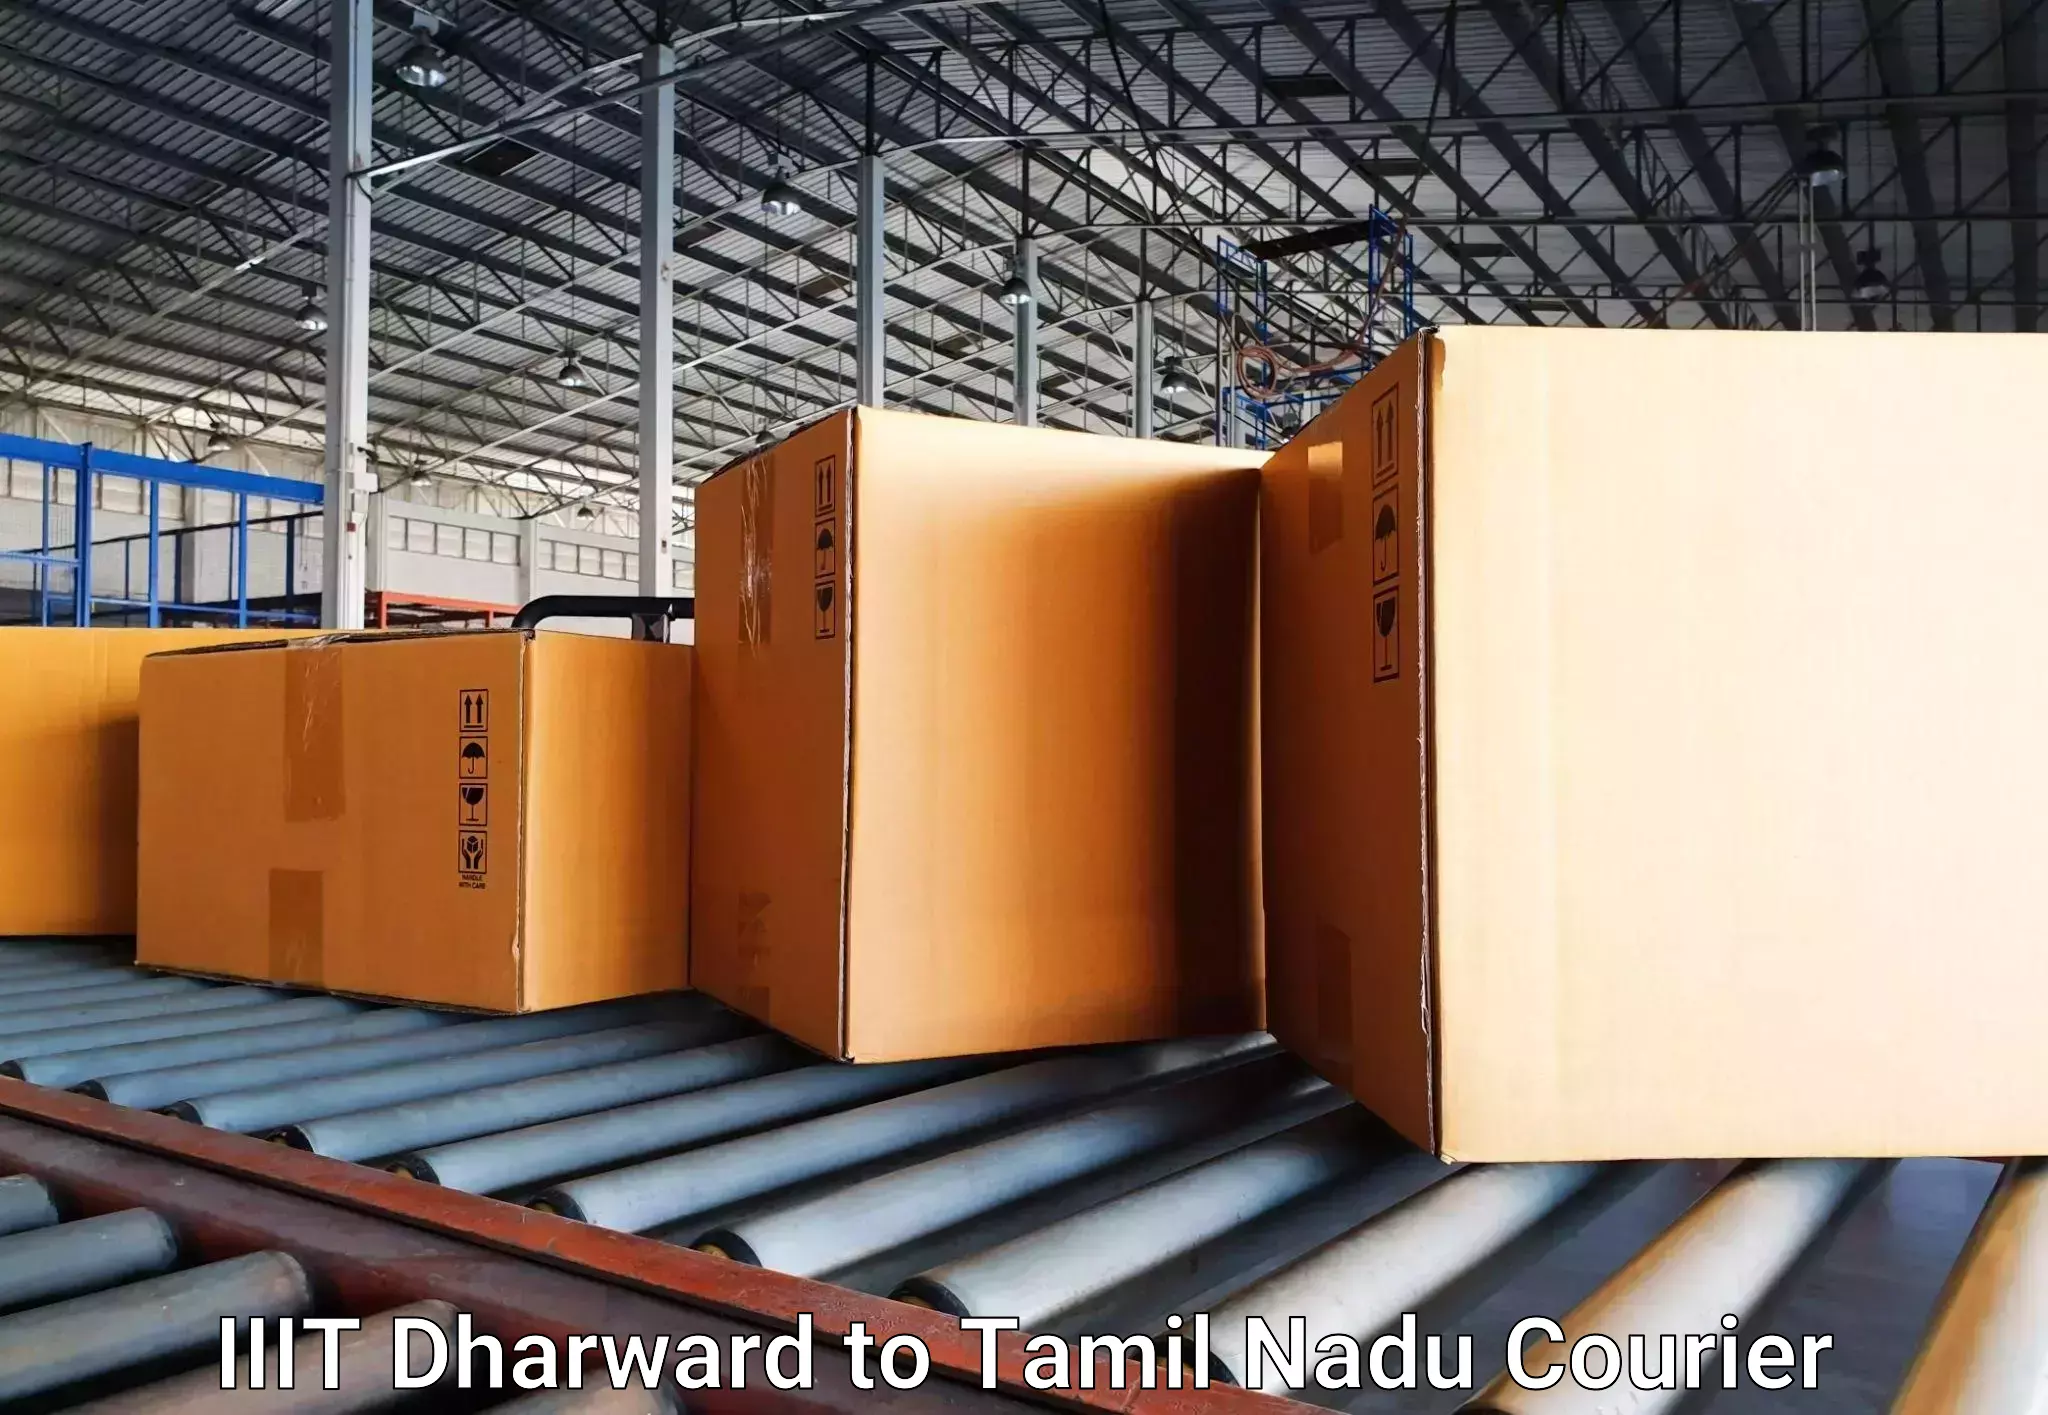 Luggage shipping consultation IIIT Dharward to The Gandhigram Rural Institute